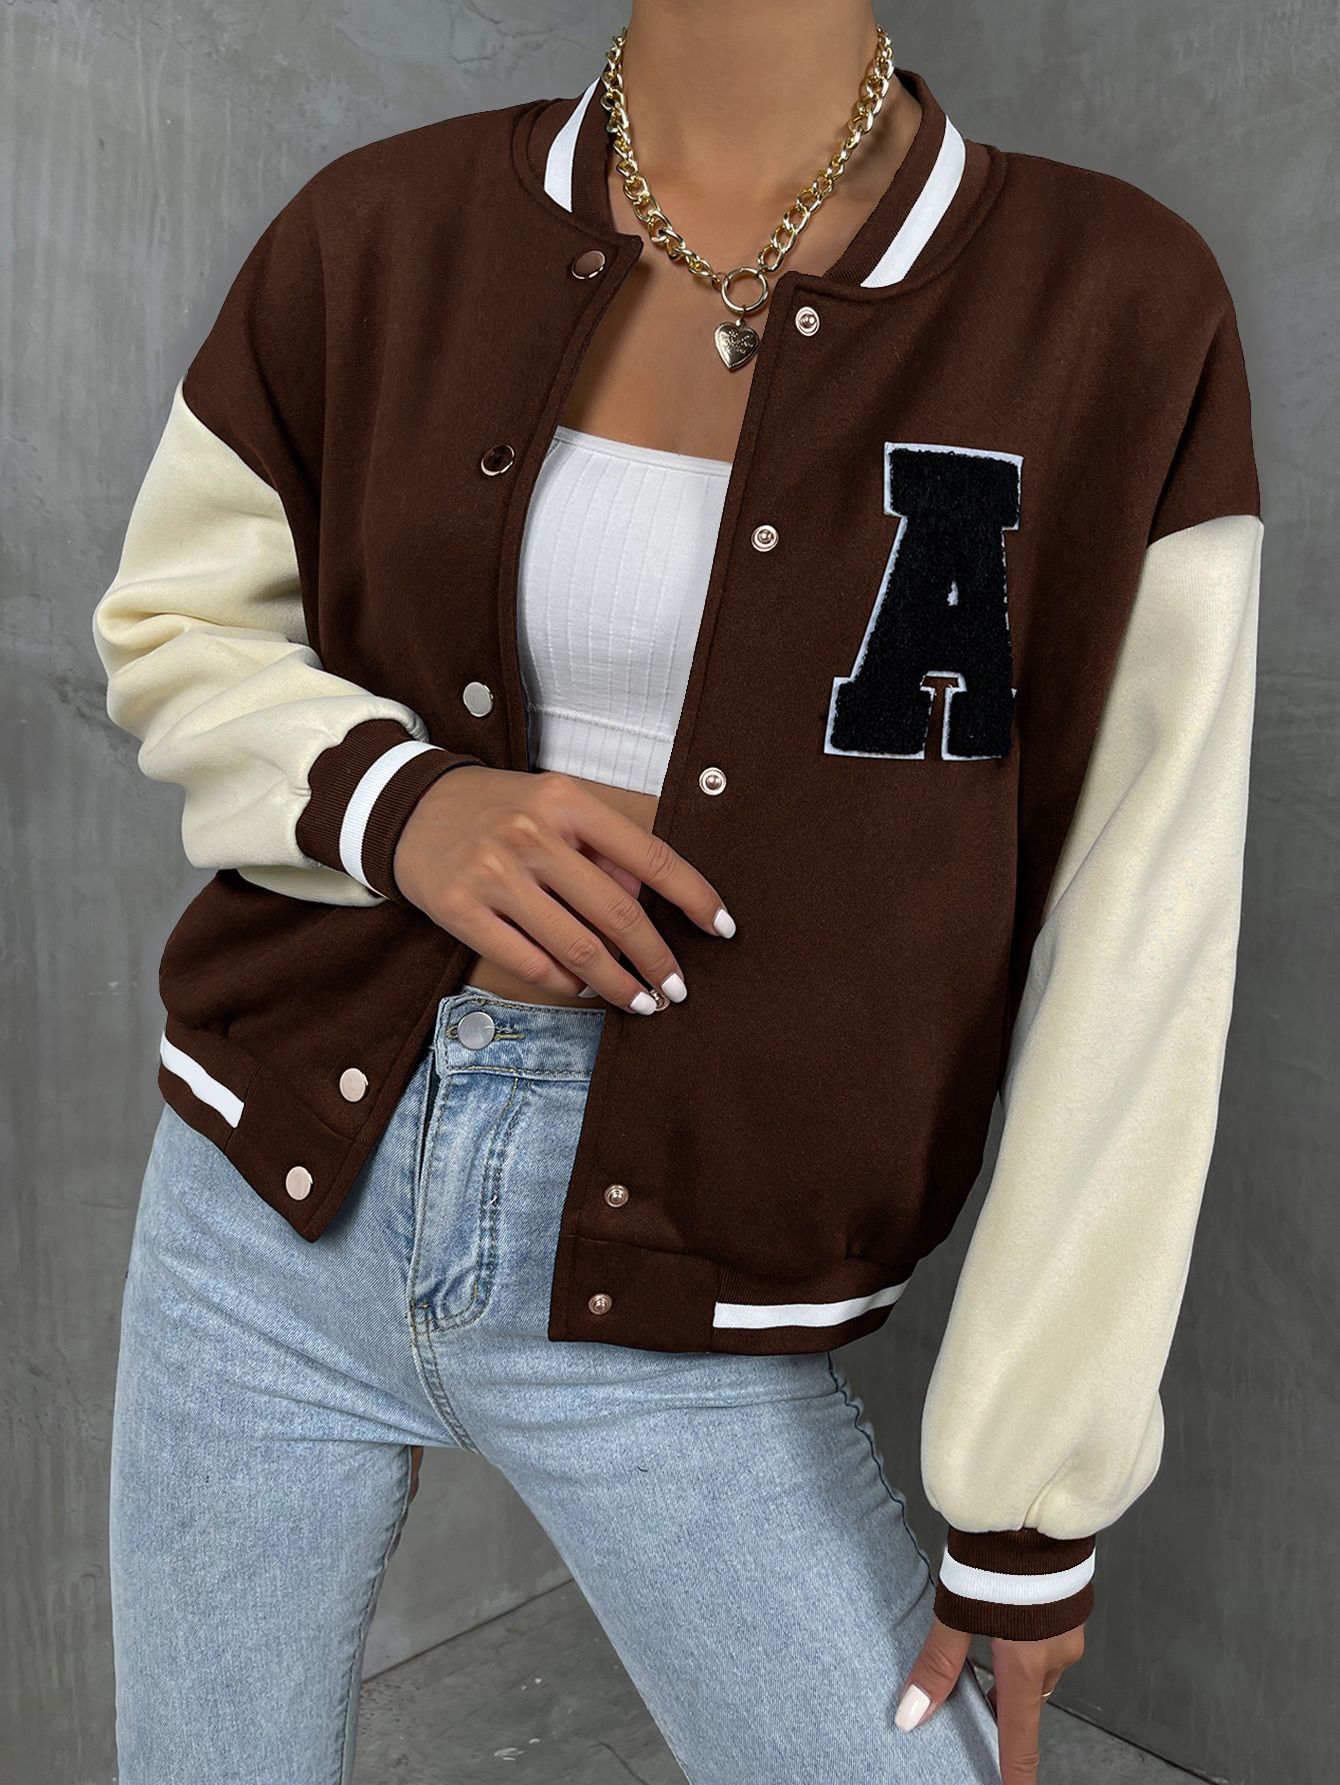 How to Wear College Jacket: 15 Cute Outfit Ideas for Women